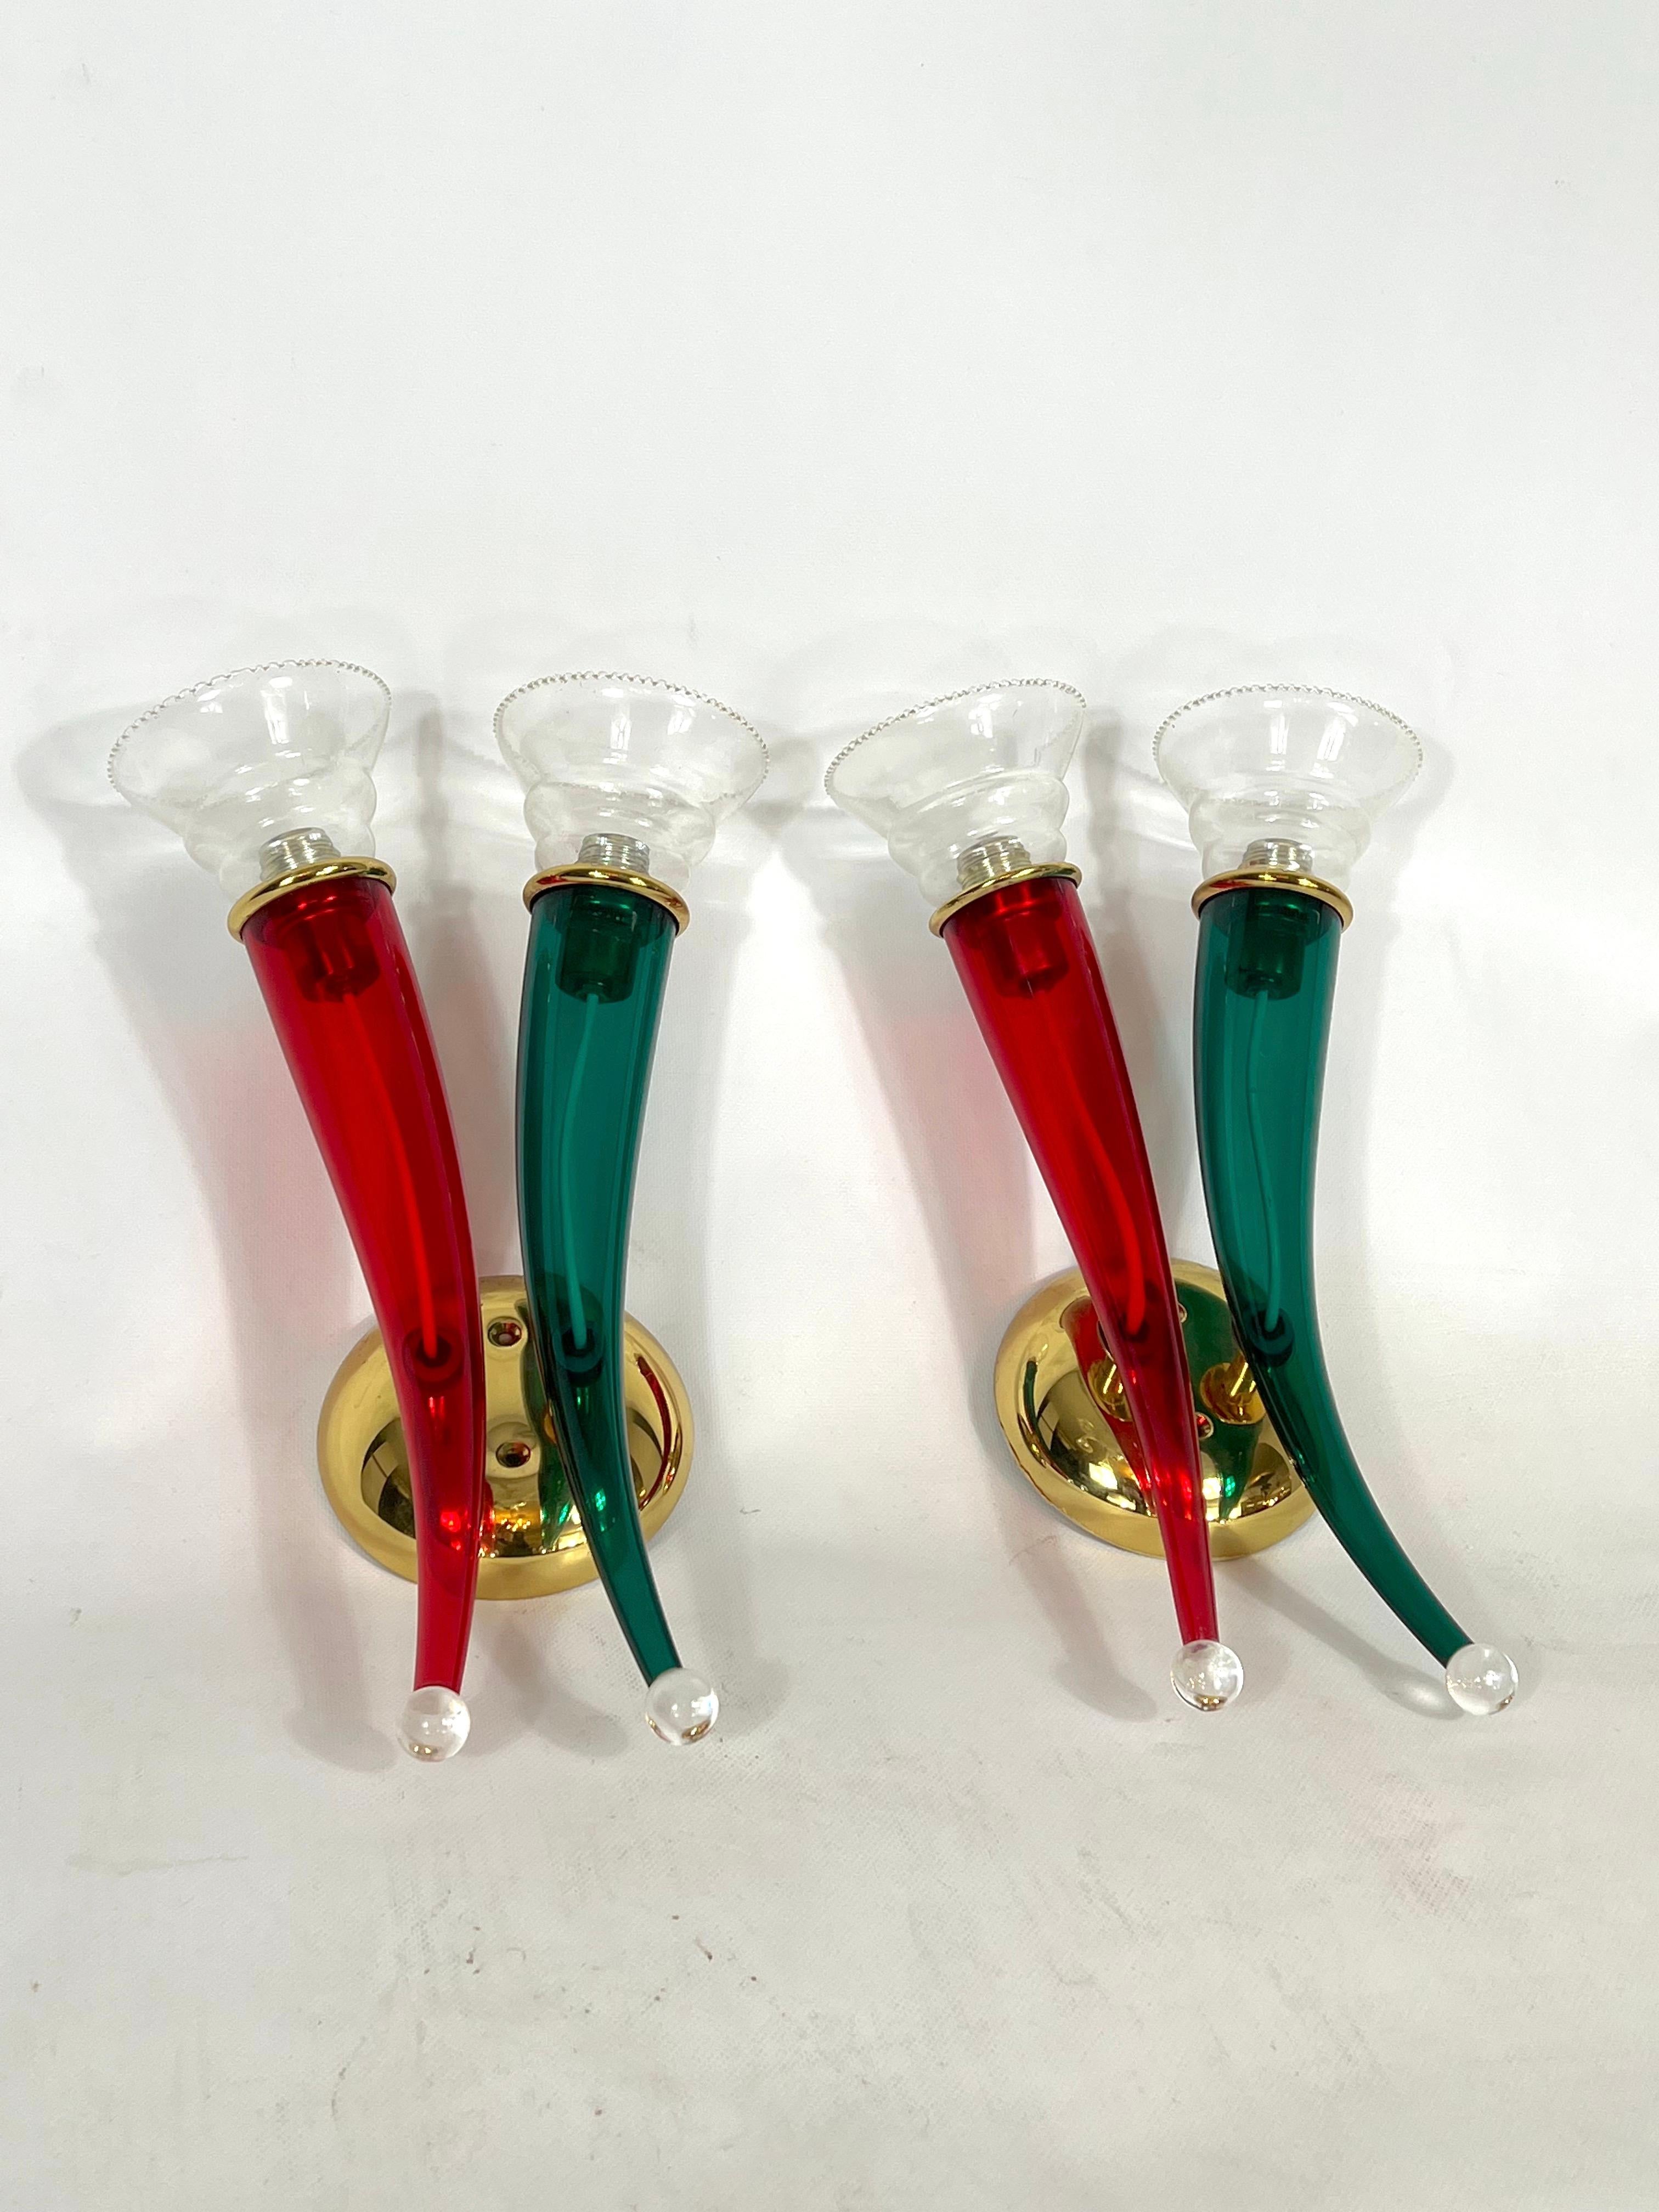 Mid-Century Modern Vintage Pair of Murano Glass Sconces Signed by VeArt, Italy, 1970s For Sale